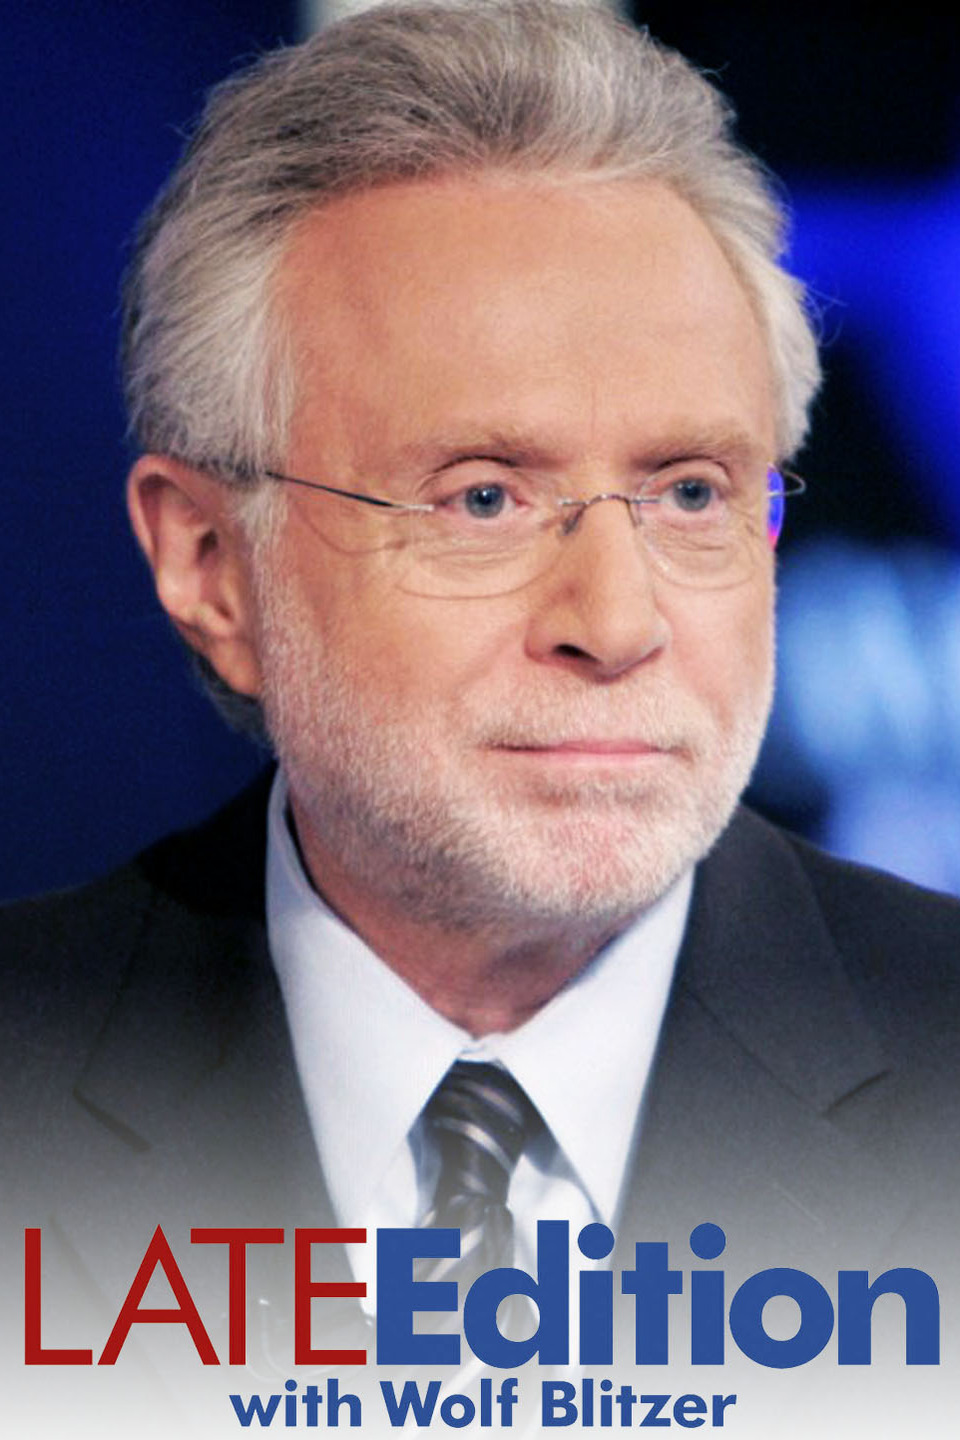 Late Edition with Wolf Blitzer